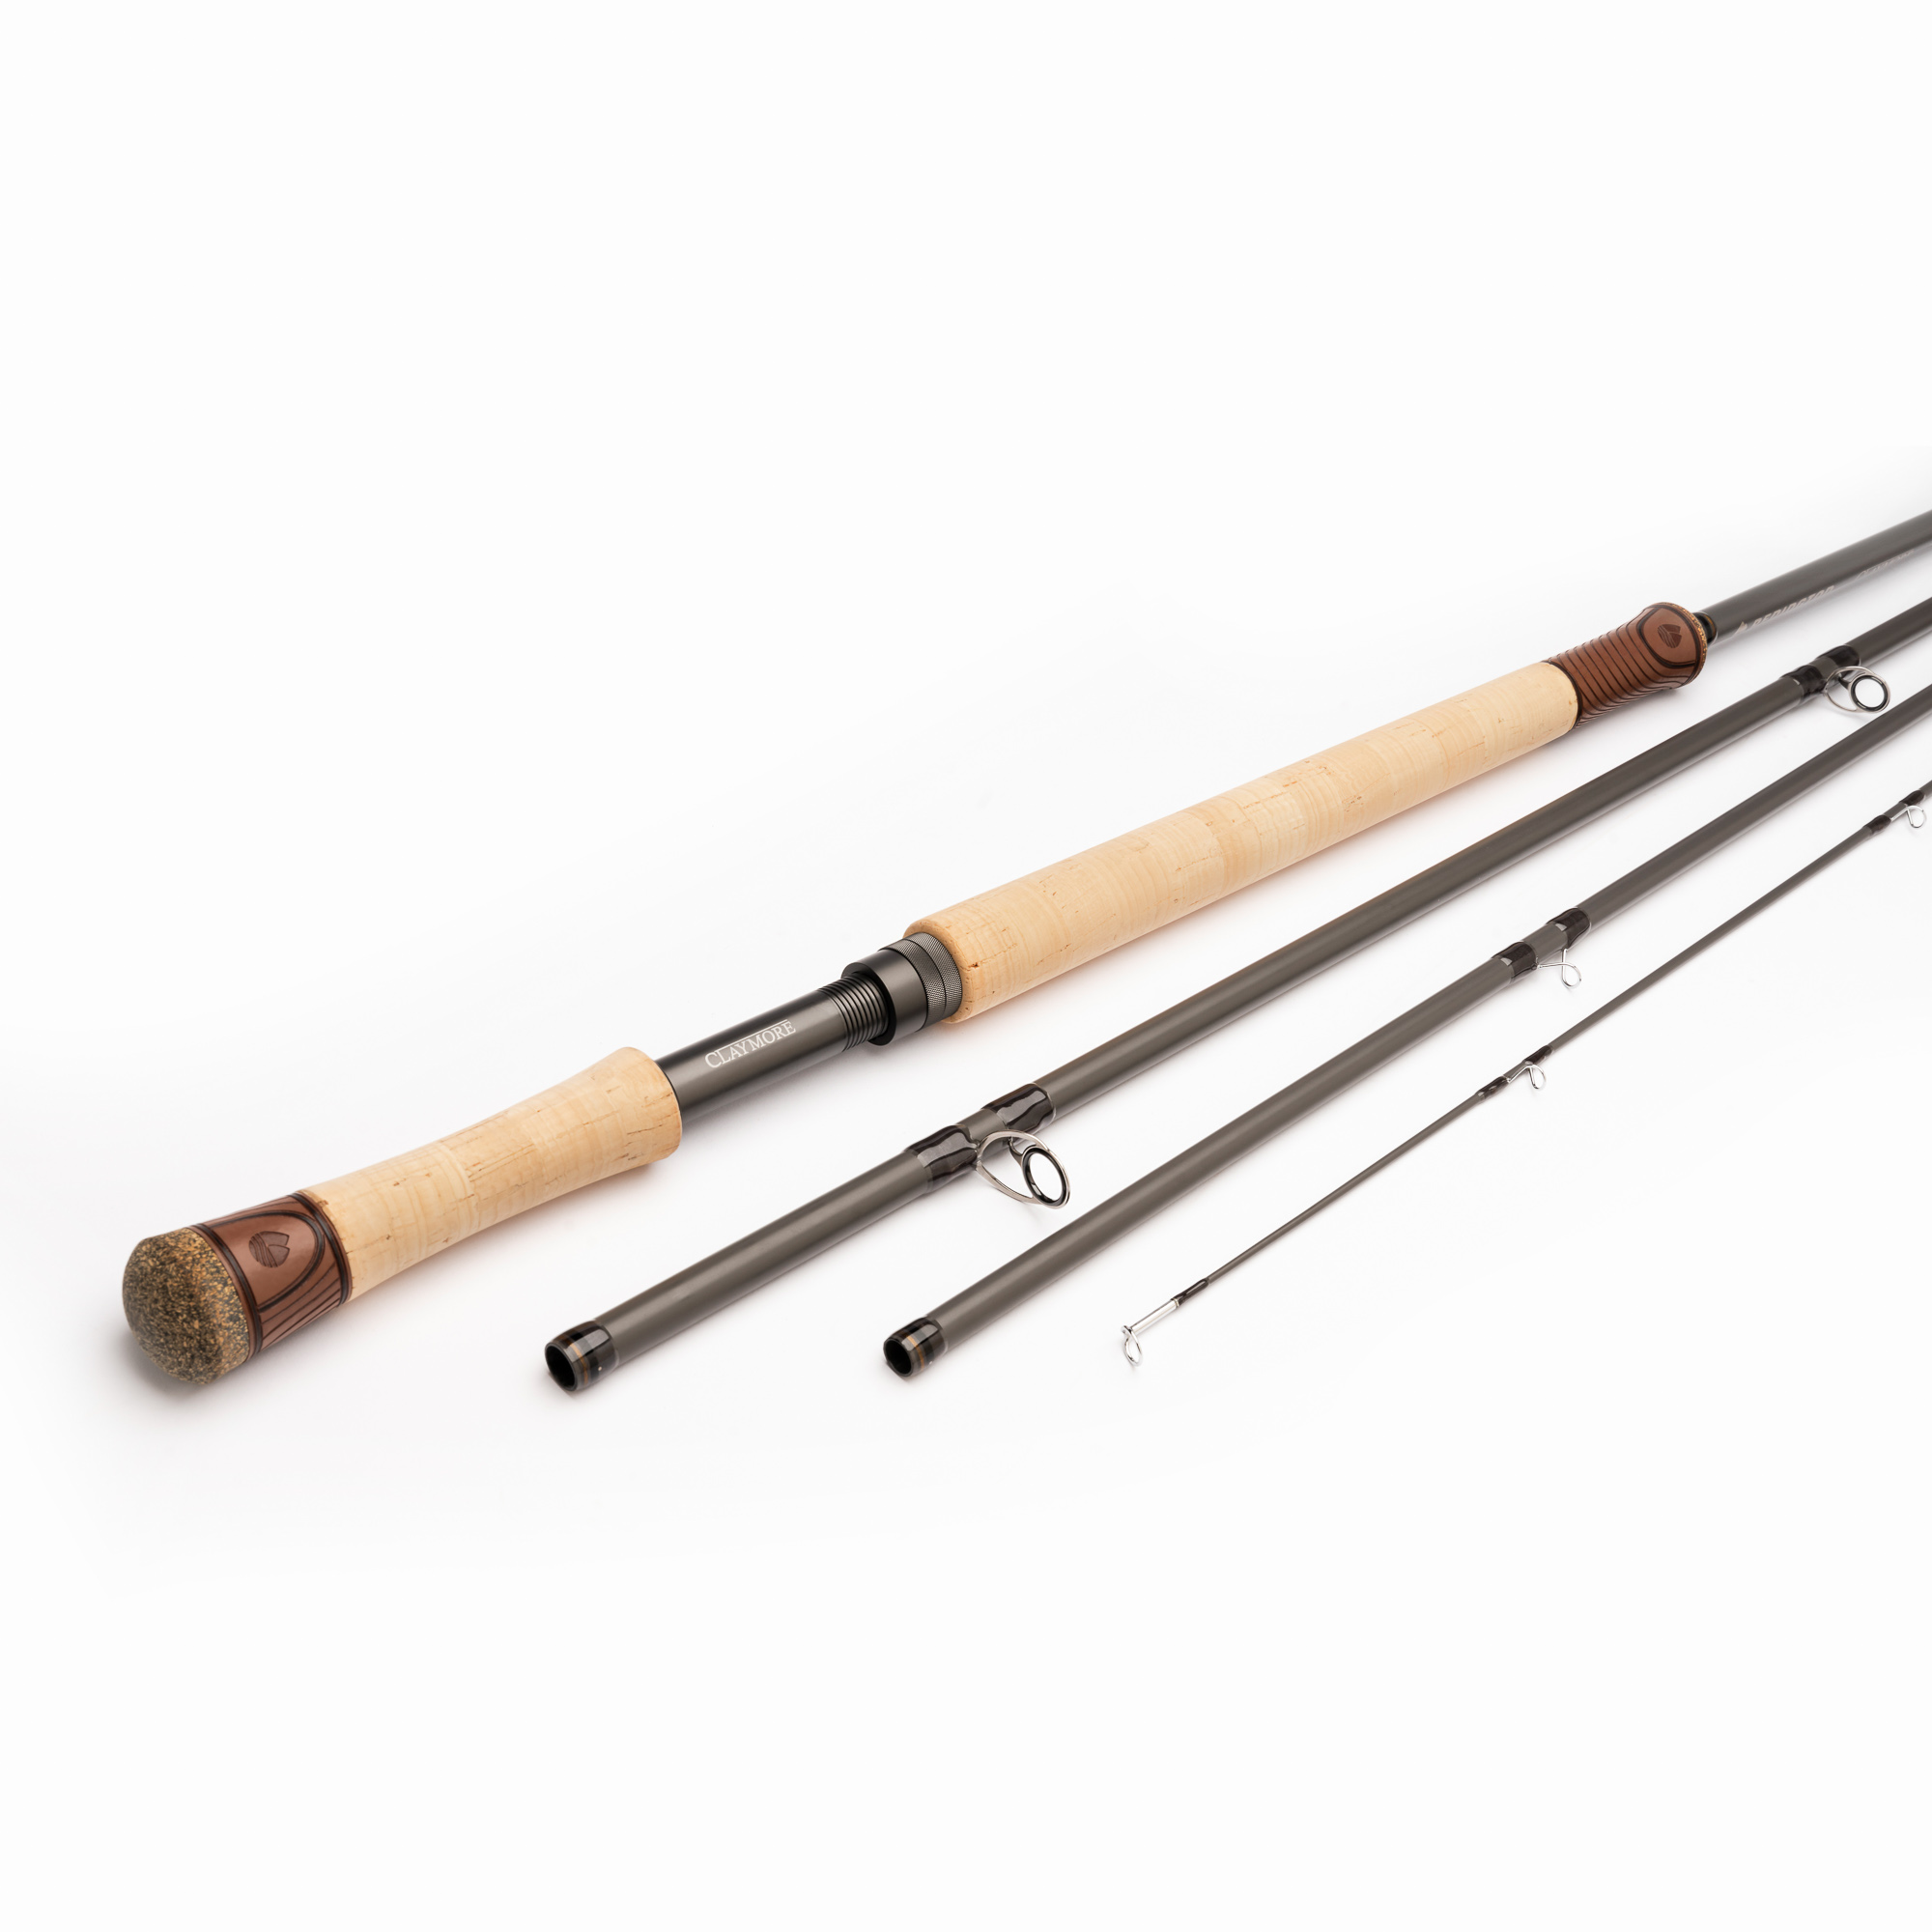 Redington Claymore Trout Spey Fly Rod – Guide Flyfishing, Fly Fishing Rods,  Reels, Sage, Redington, RIO